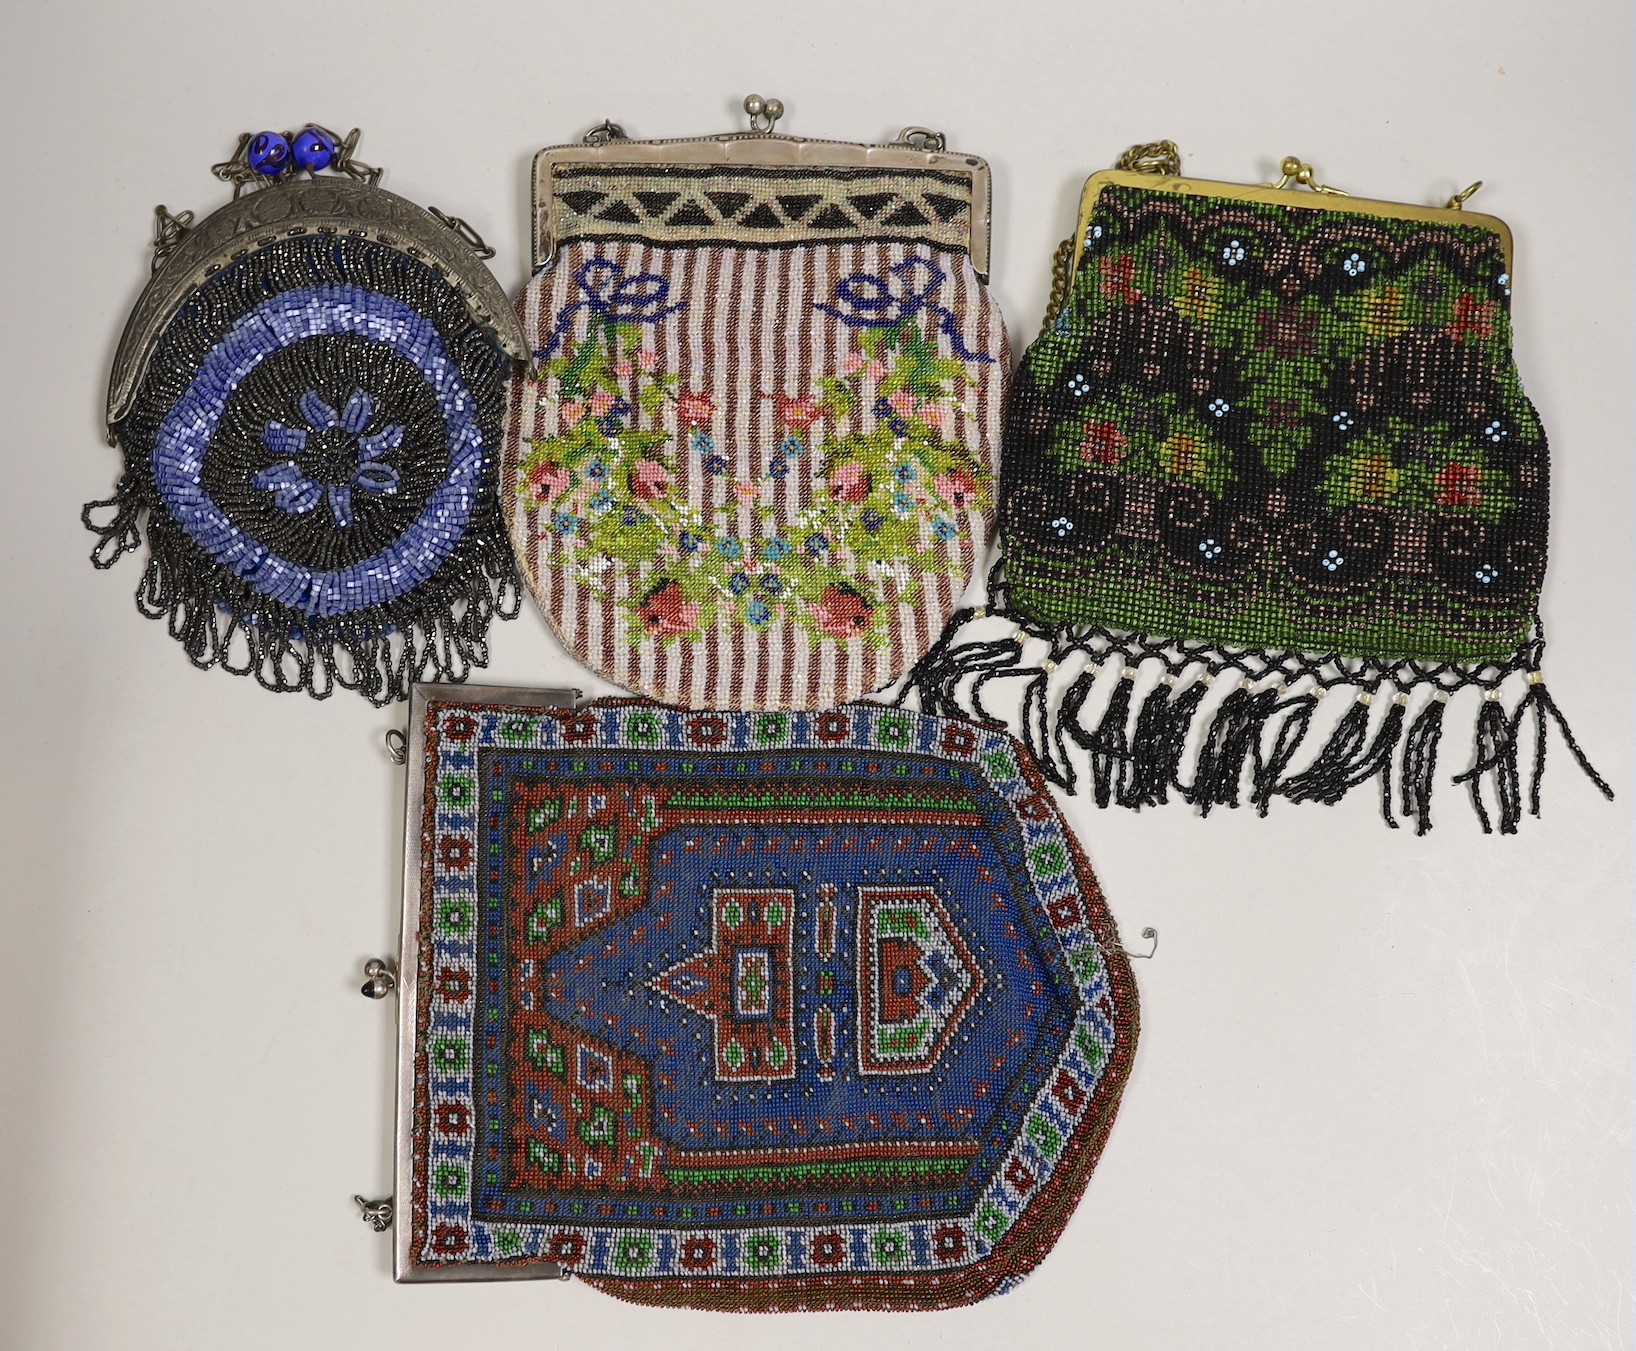 Two large metal framed Edwardian beaded bags, a later similar bead bag and a 1930’s metal framed bag with cut steel with blue beads.(4)